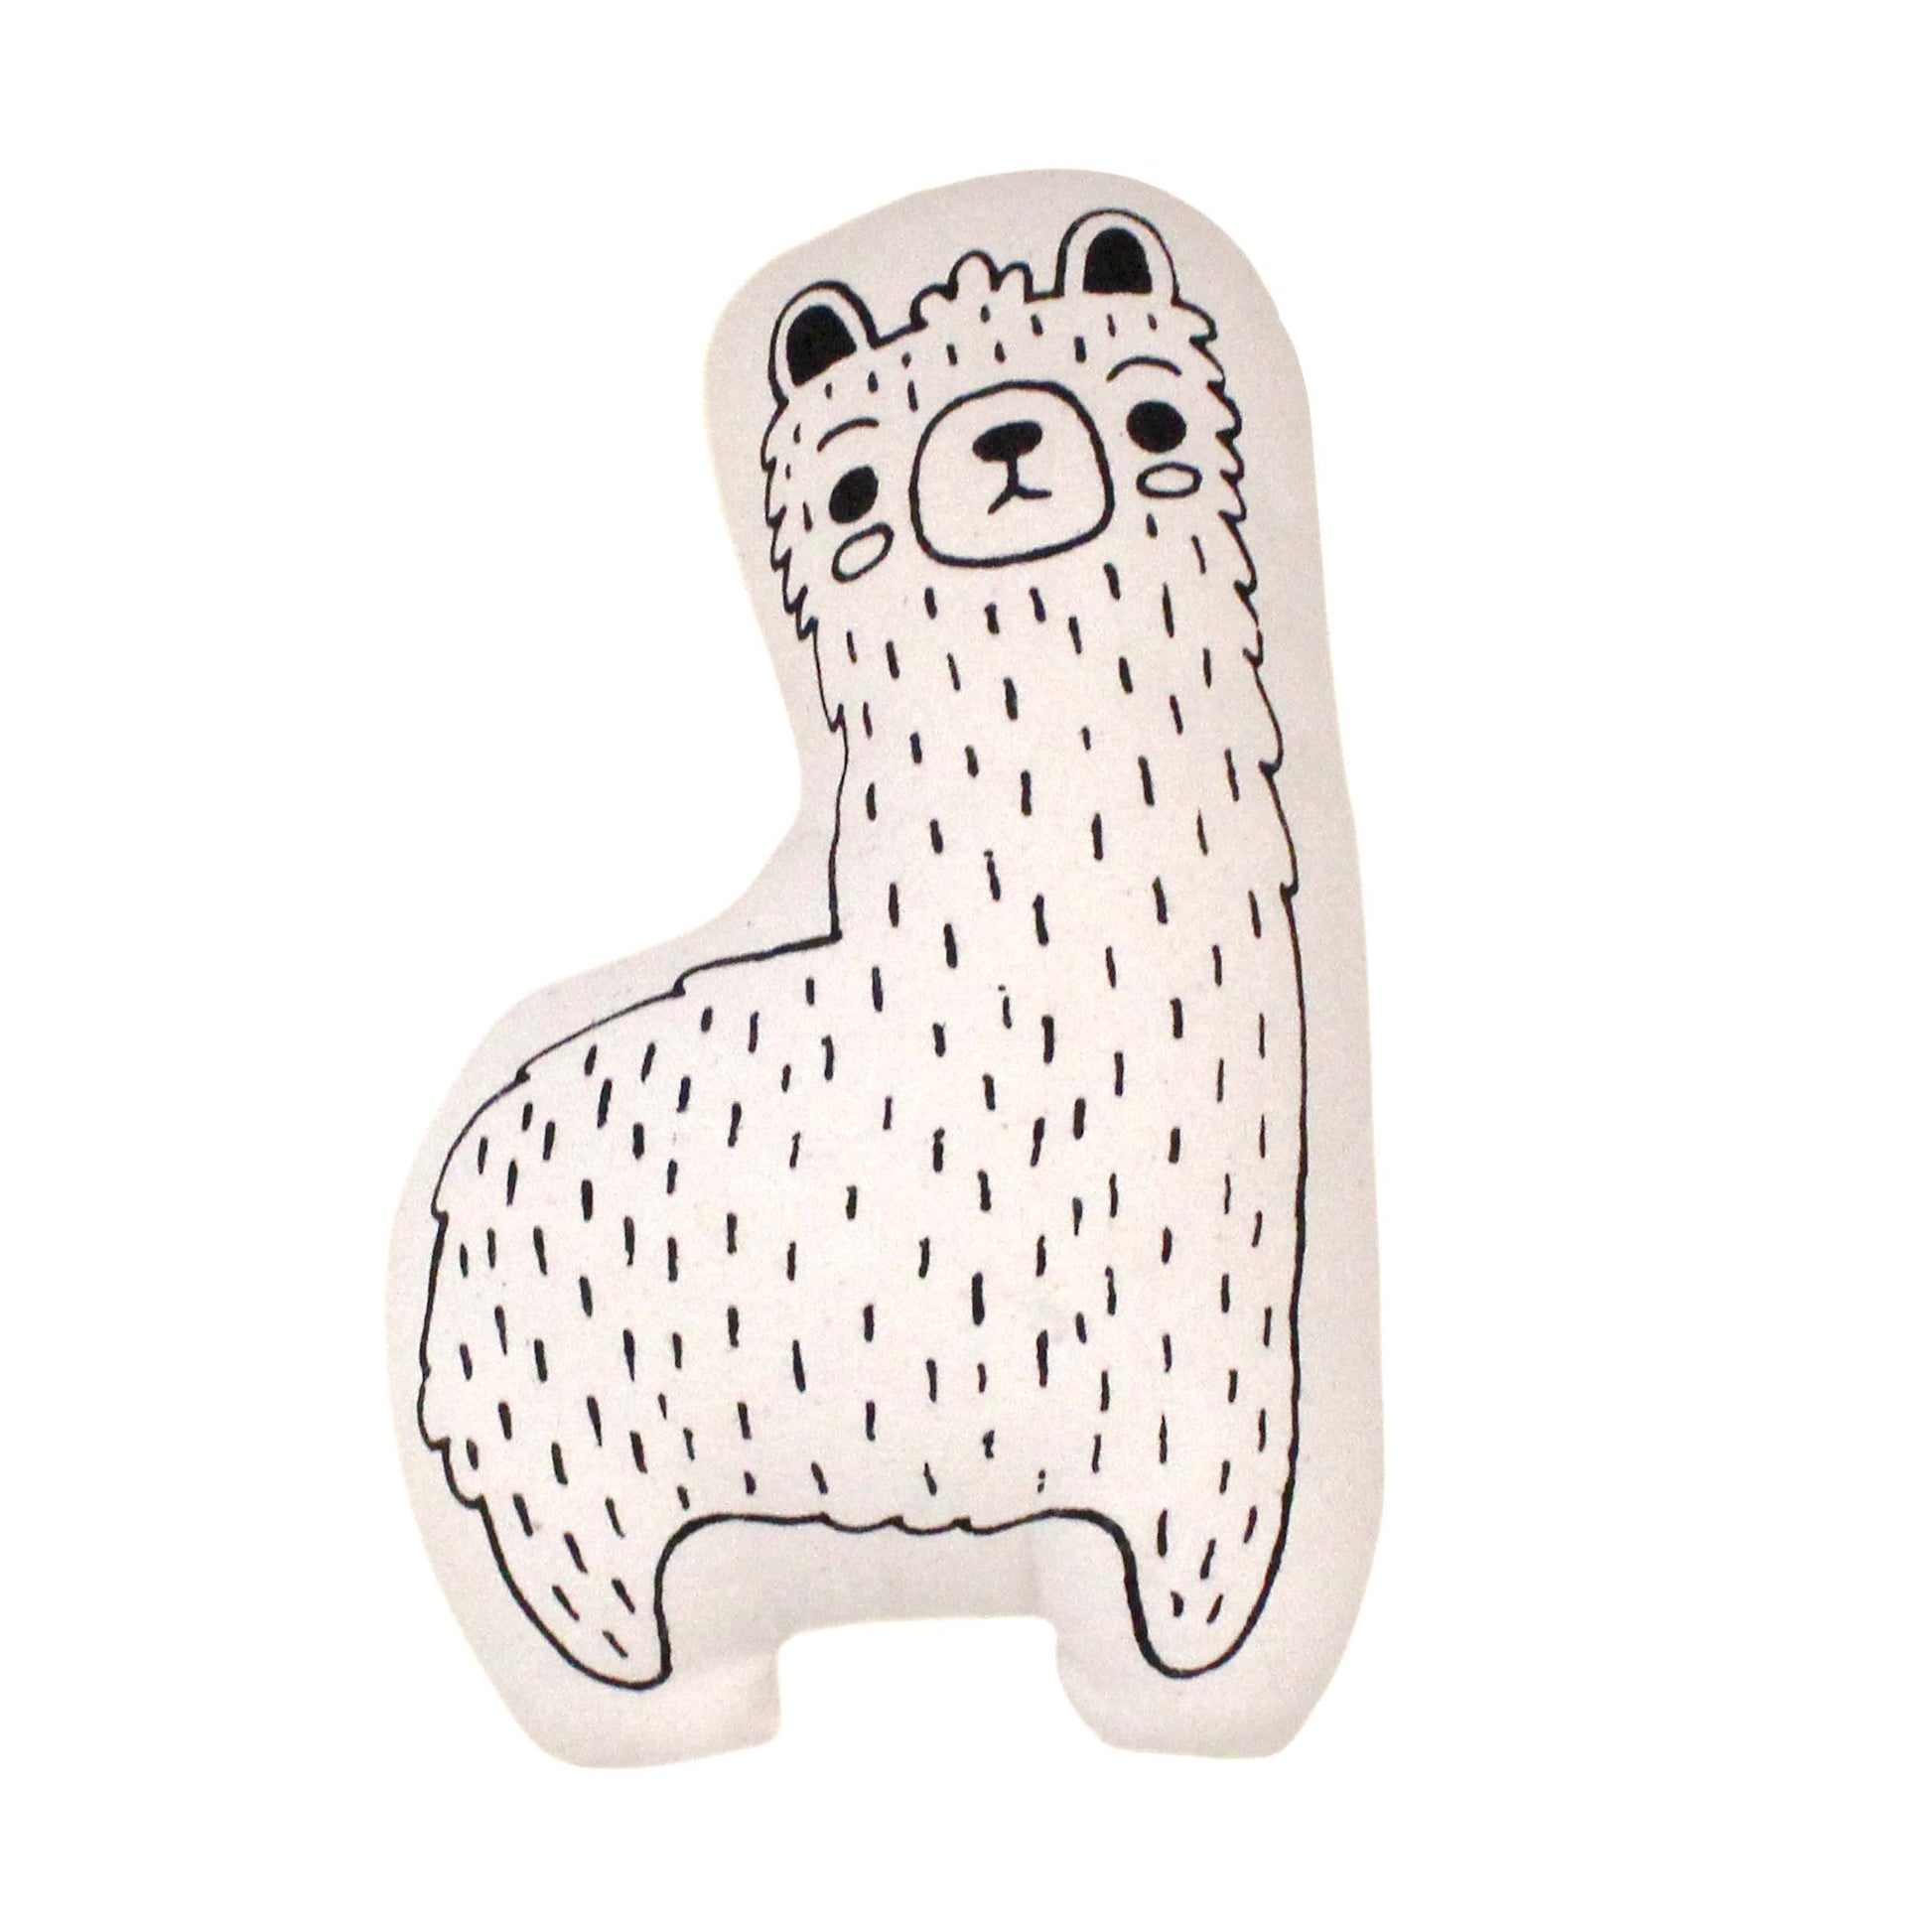 Llama Animal Pillow  Imani + KIDS by Imani Collective   -better made easy-eco-friendly-sustainable-gifting